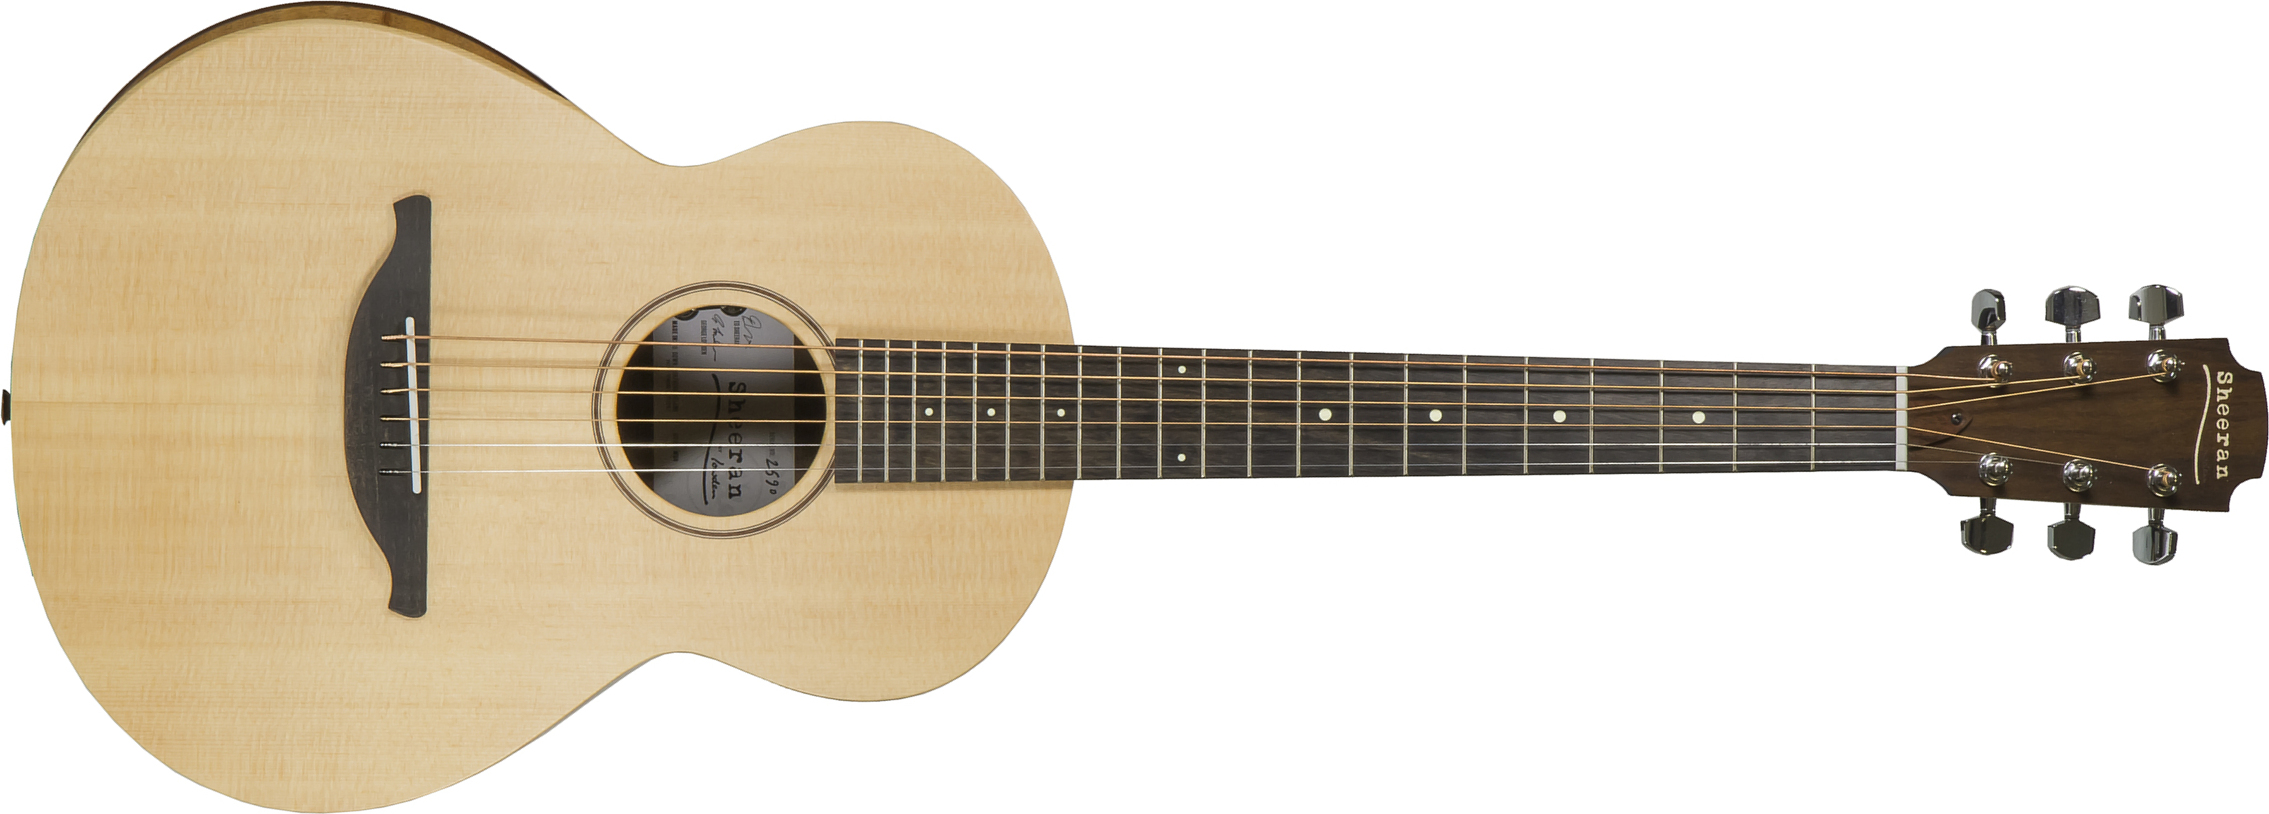 Sheeran By Lowden W04 Parlor Epicea Noyer Eb +housse - Natural Satin - Acoustic guitar & electro - Main picture